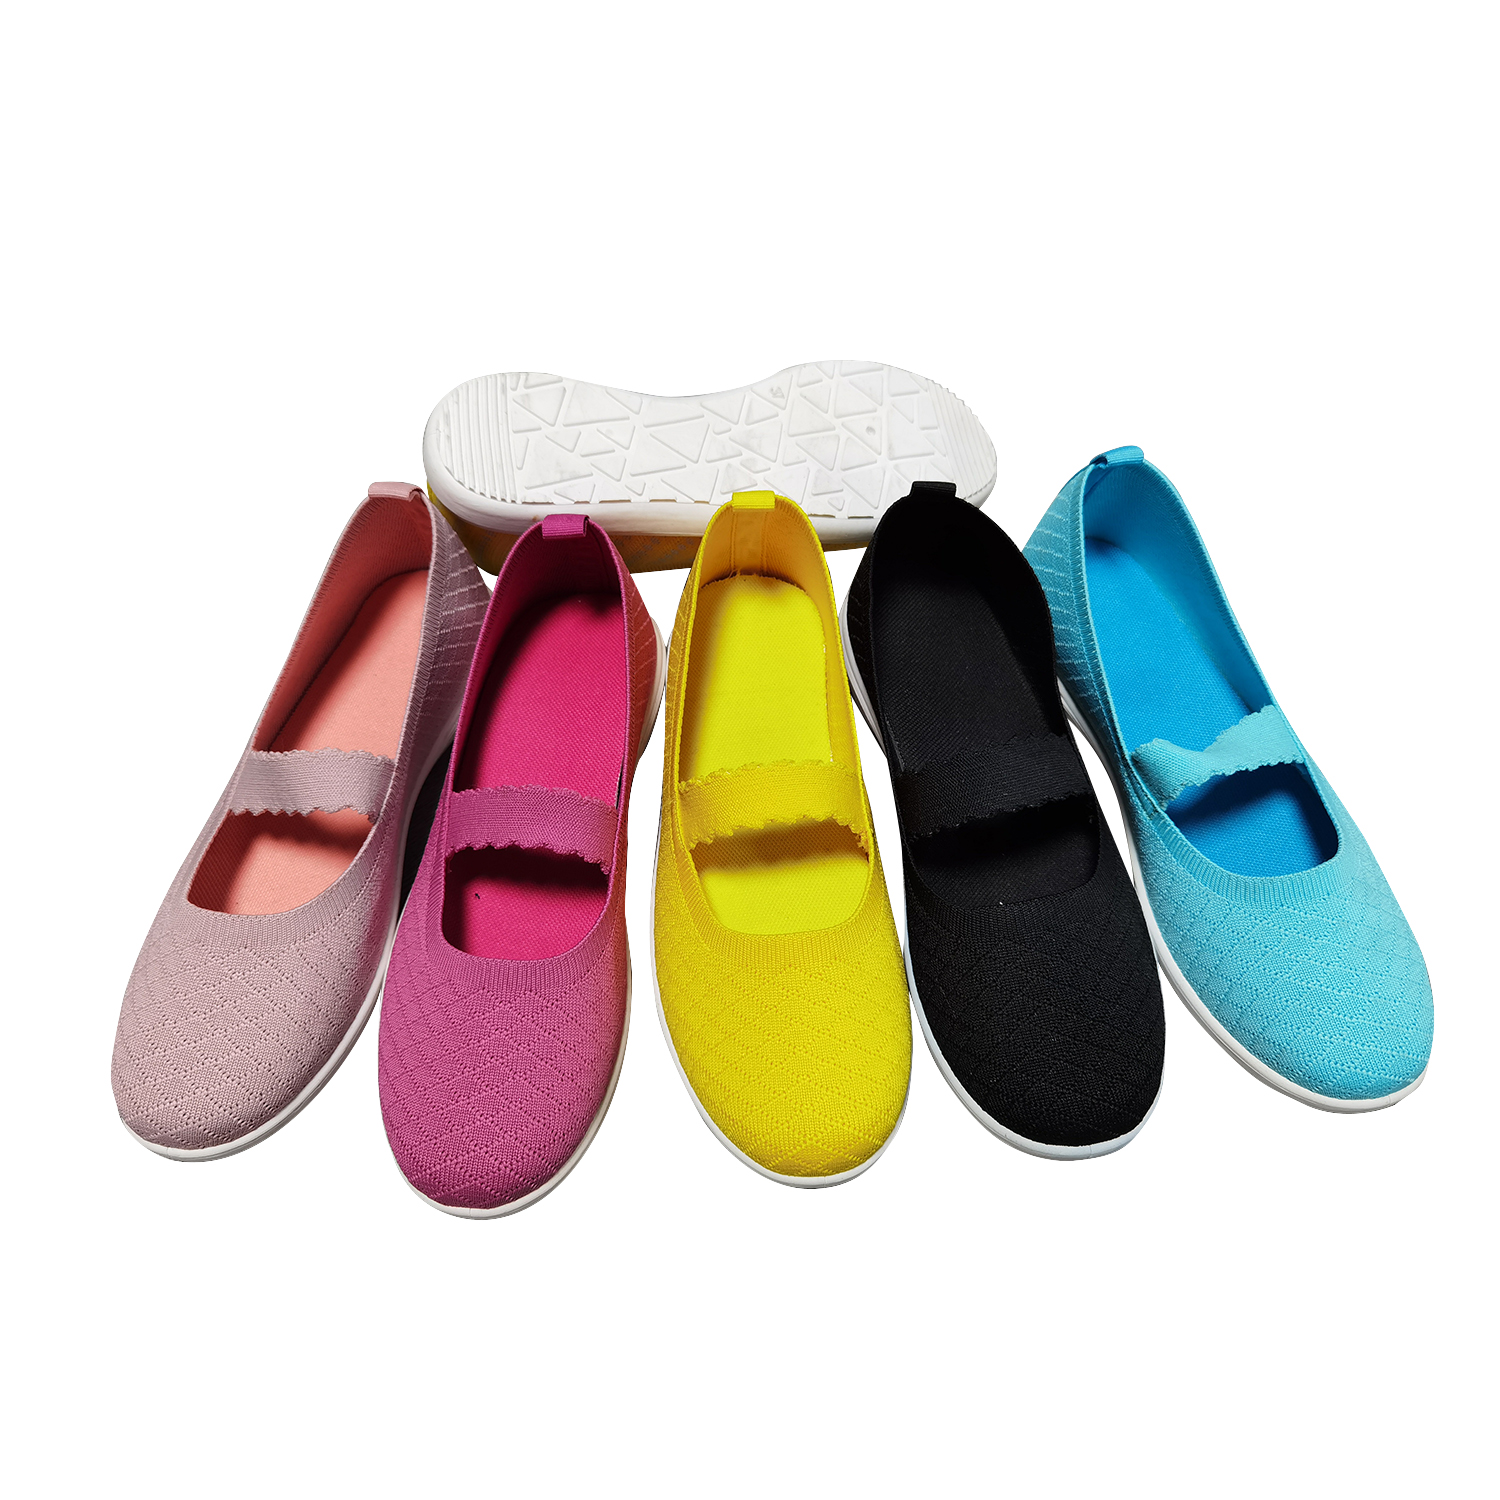 Women's Casual Shoes Flat Slip On Loafer